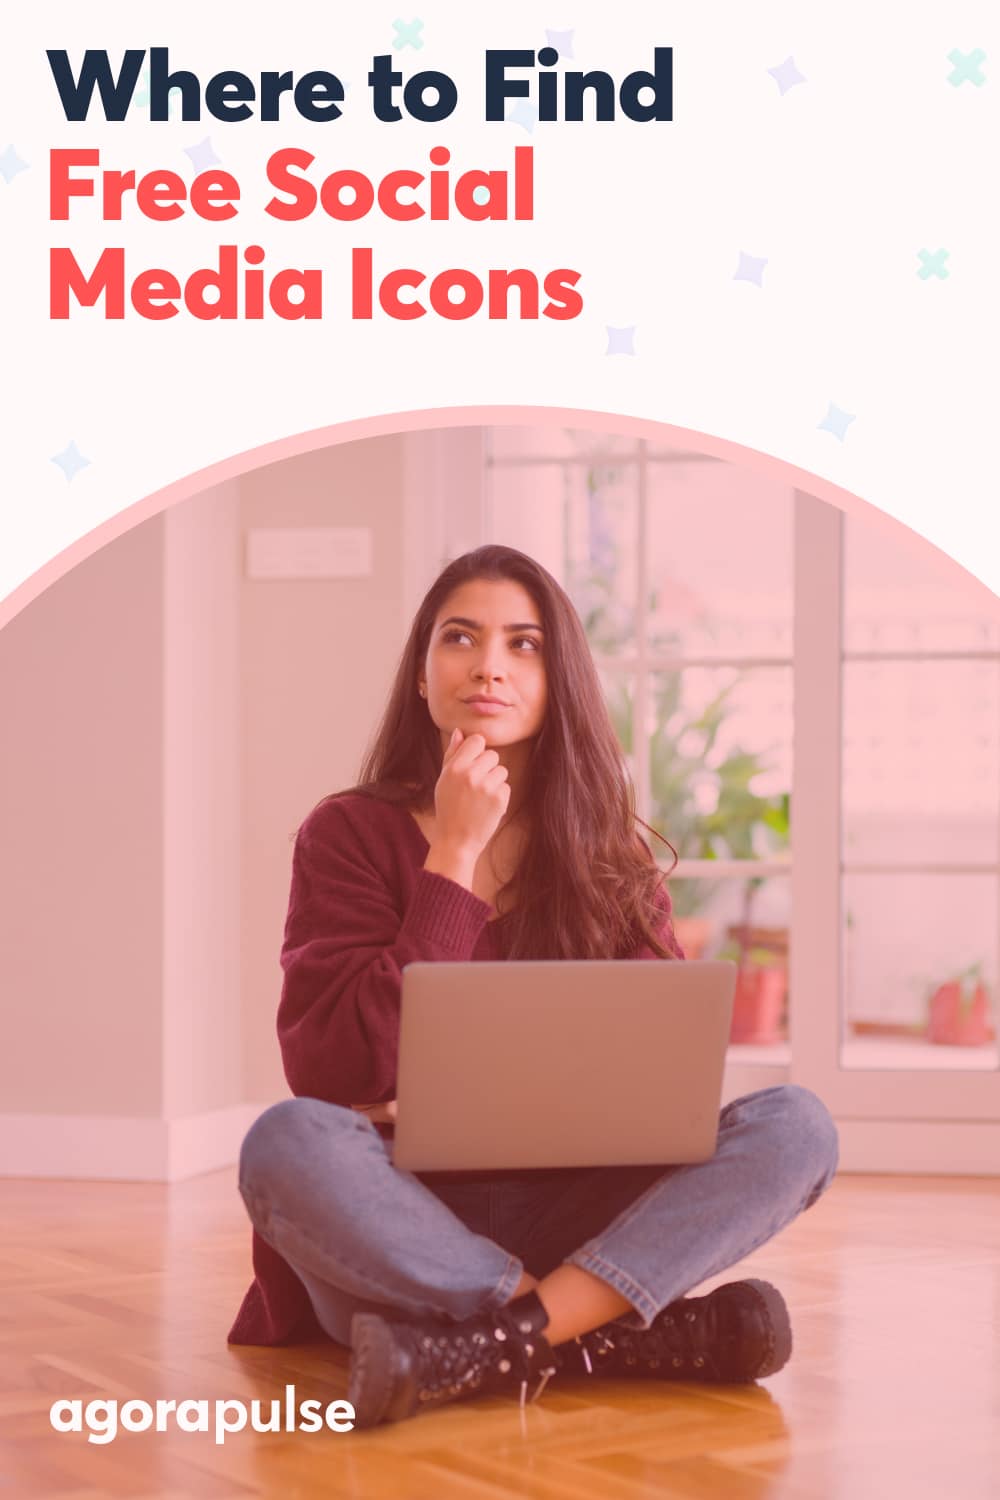 Where to Find Free Social Media Icons and How to Use Them Without Worries